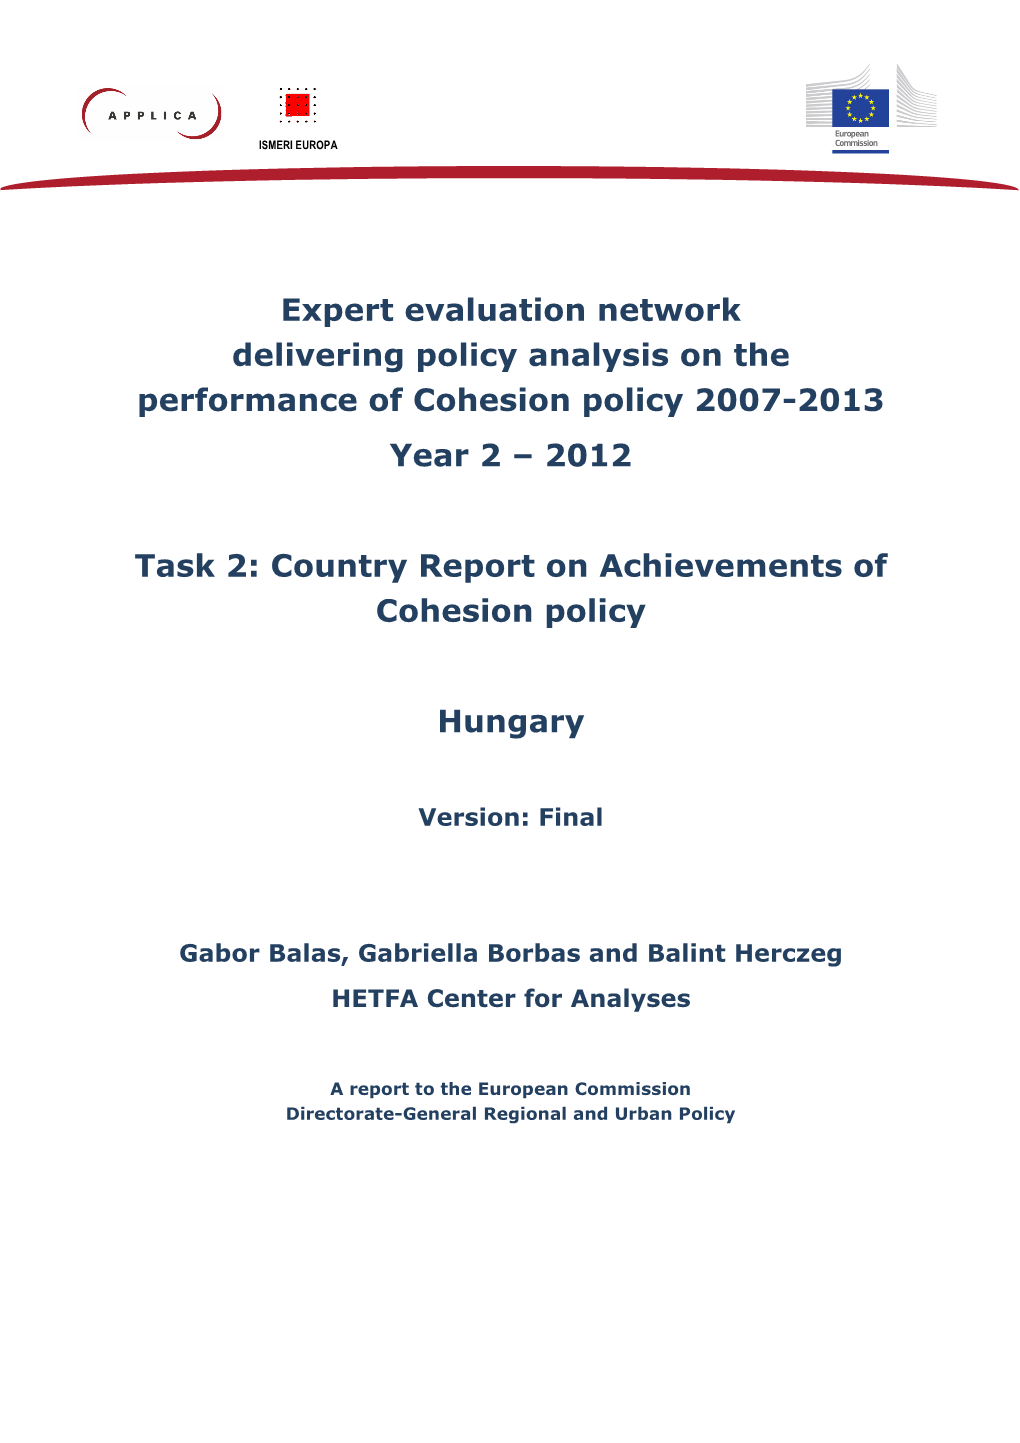 2012 Task 2: Country Report on Achievements of Cohesion Policy